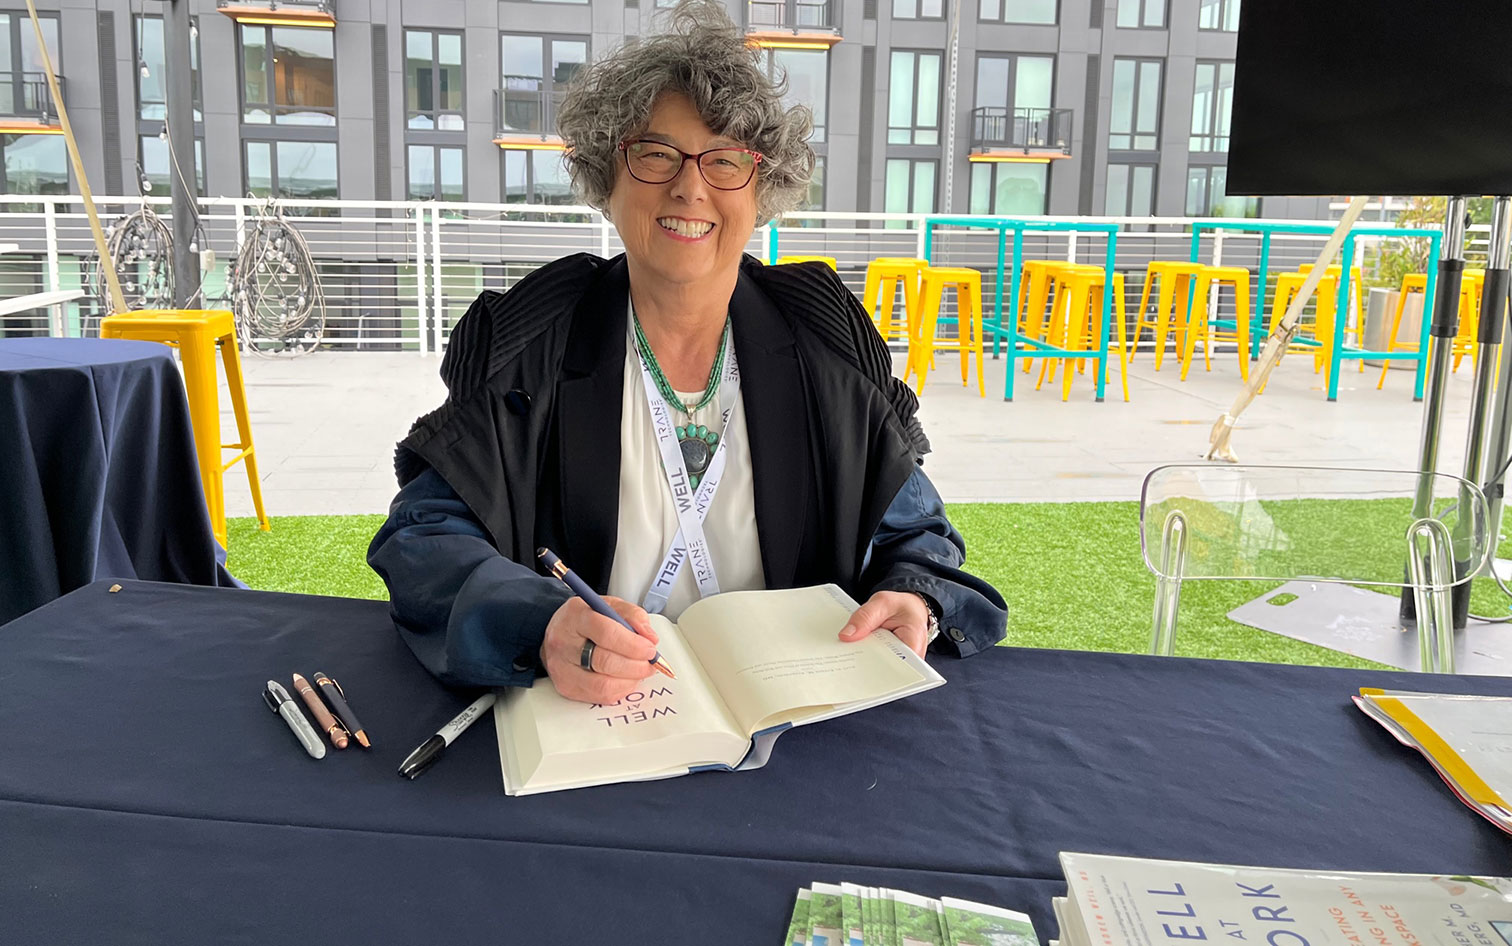 Dr. Sternberg signs her new book WELL at WORK: Creating Wellbeing in Any Workspace (Little, Brown Spark) at sold-out book signing at WELL Summit in Washington, DC, Sept. 2023.